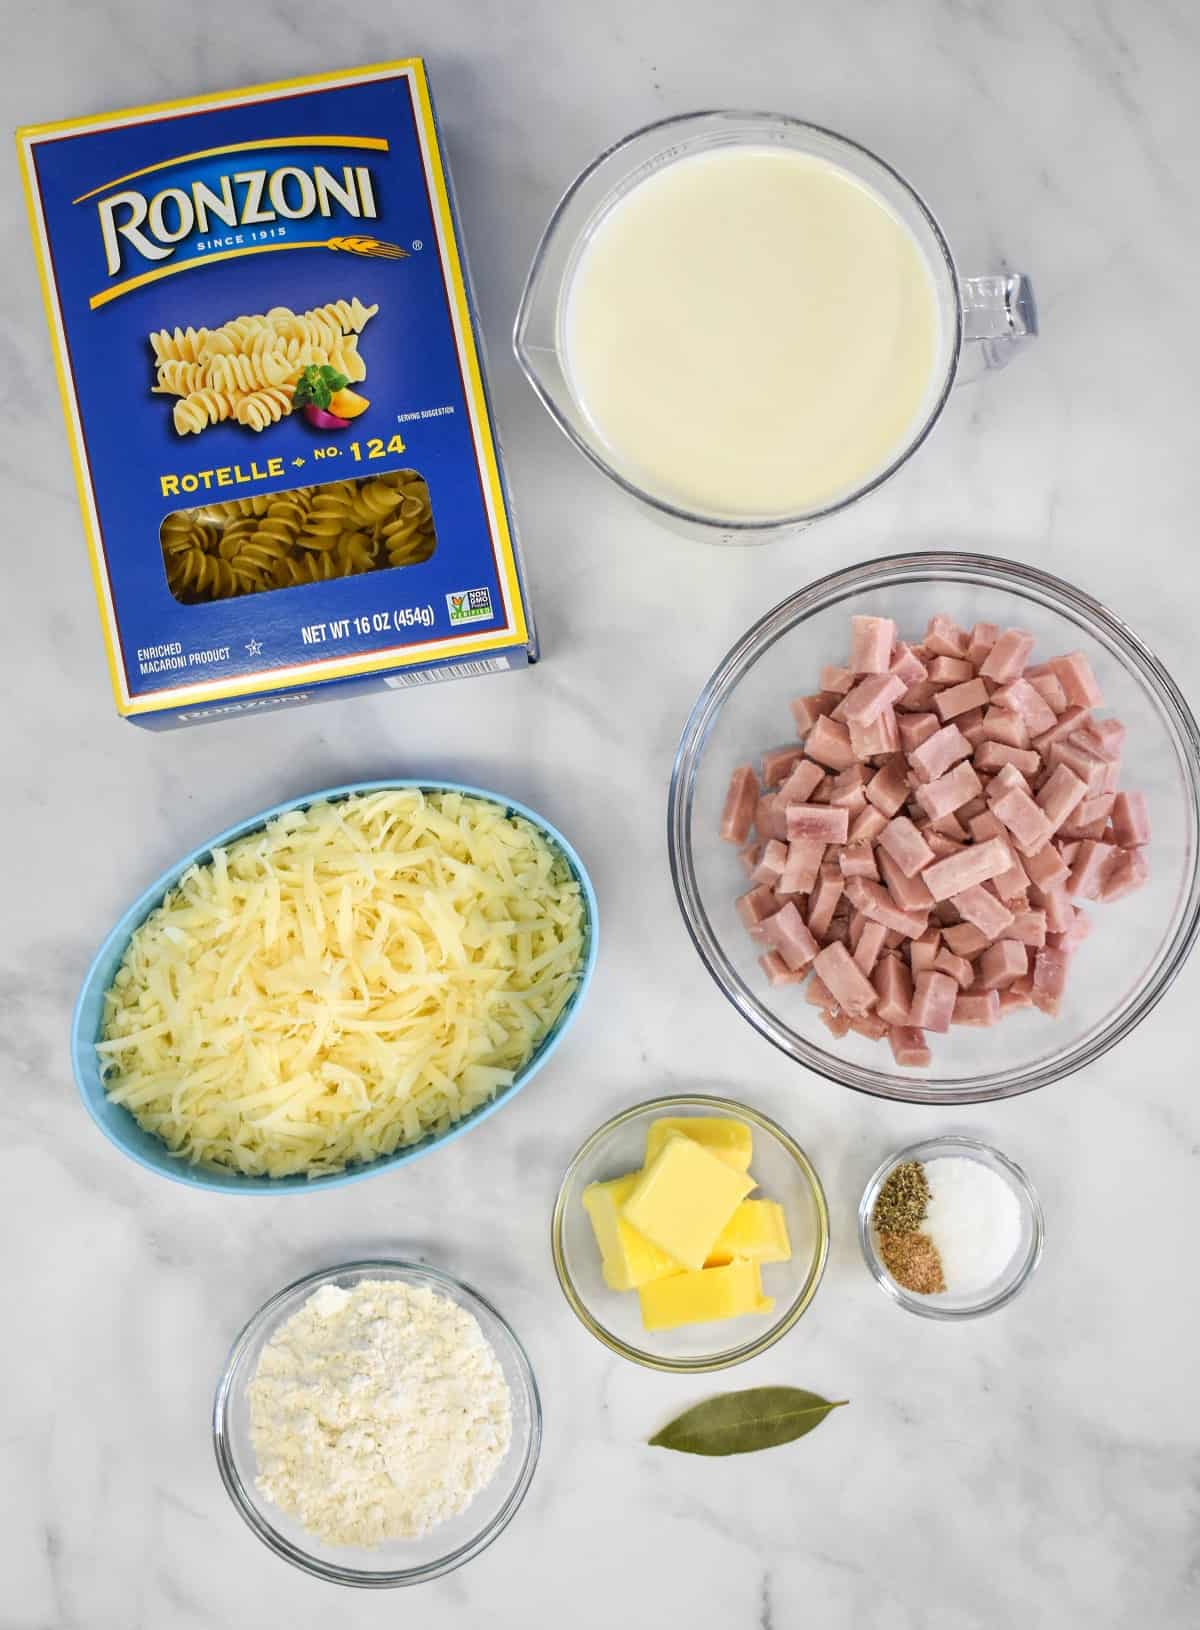 The prepped ingredients for the ham and cheese pasta arranged in separate containers on a white table.